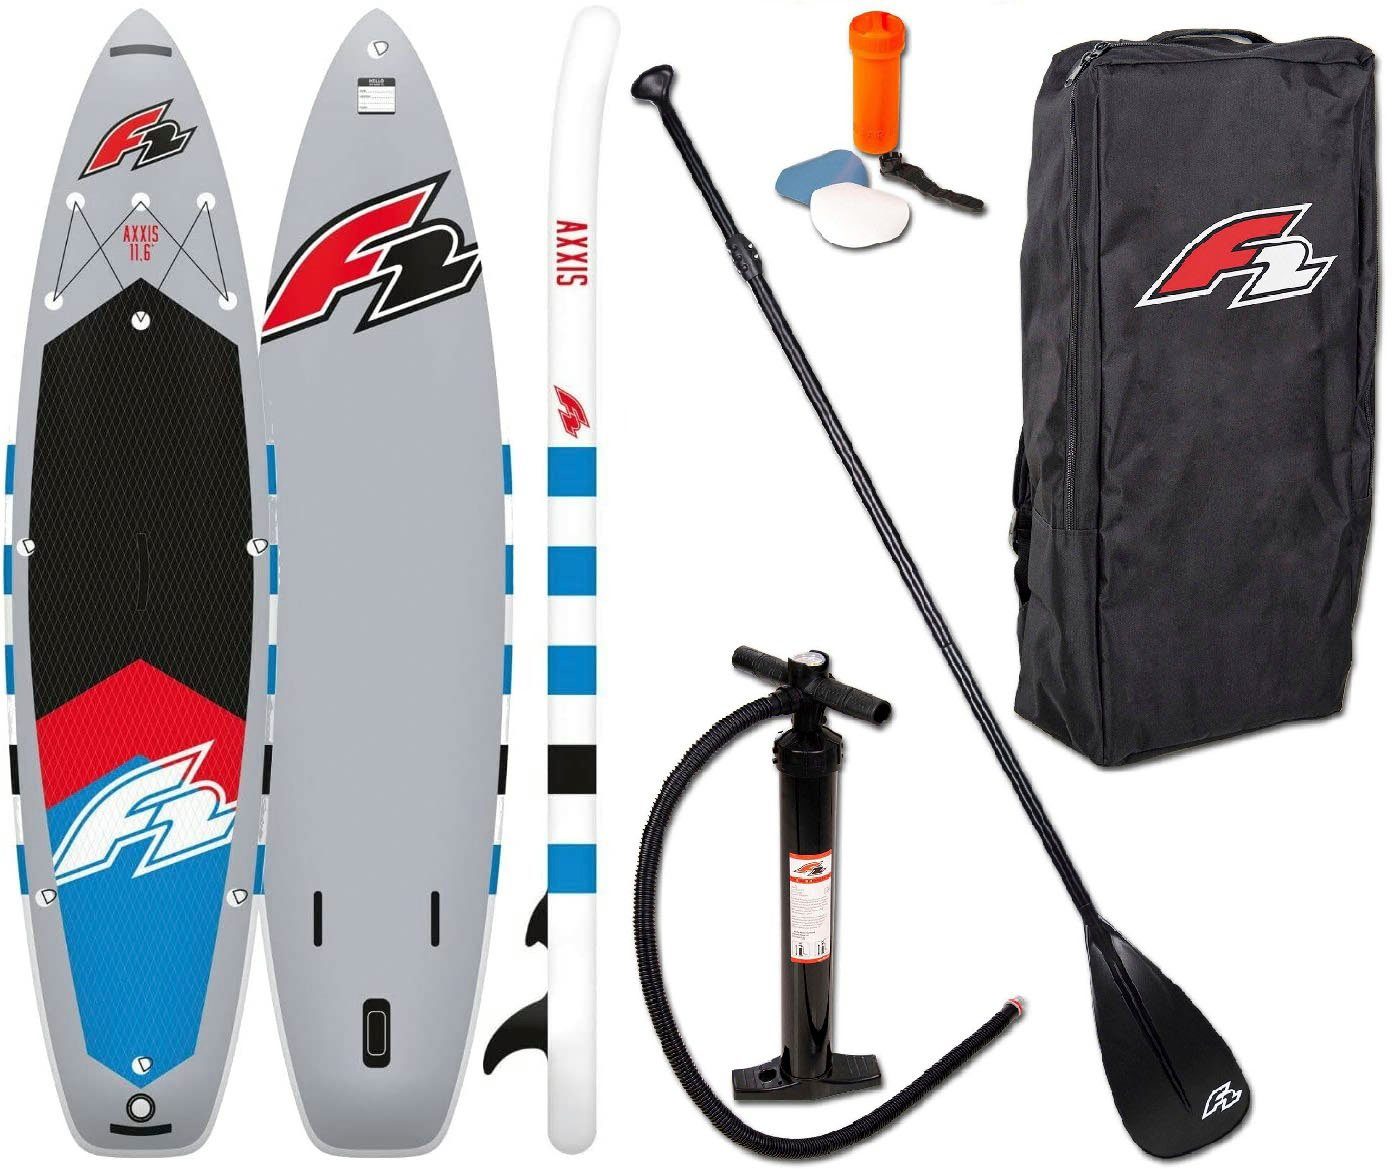 F2 Inflatable Axxis 11,6 5 SUP-Board grey, tlg) (Packung